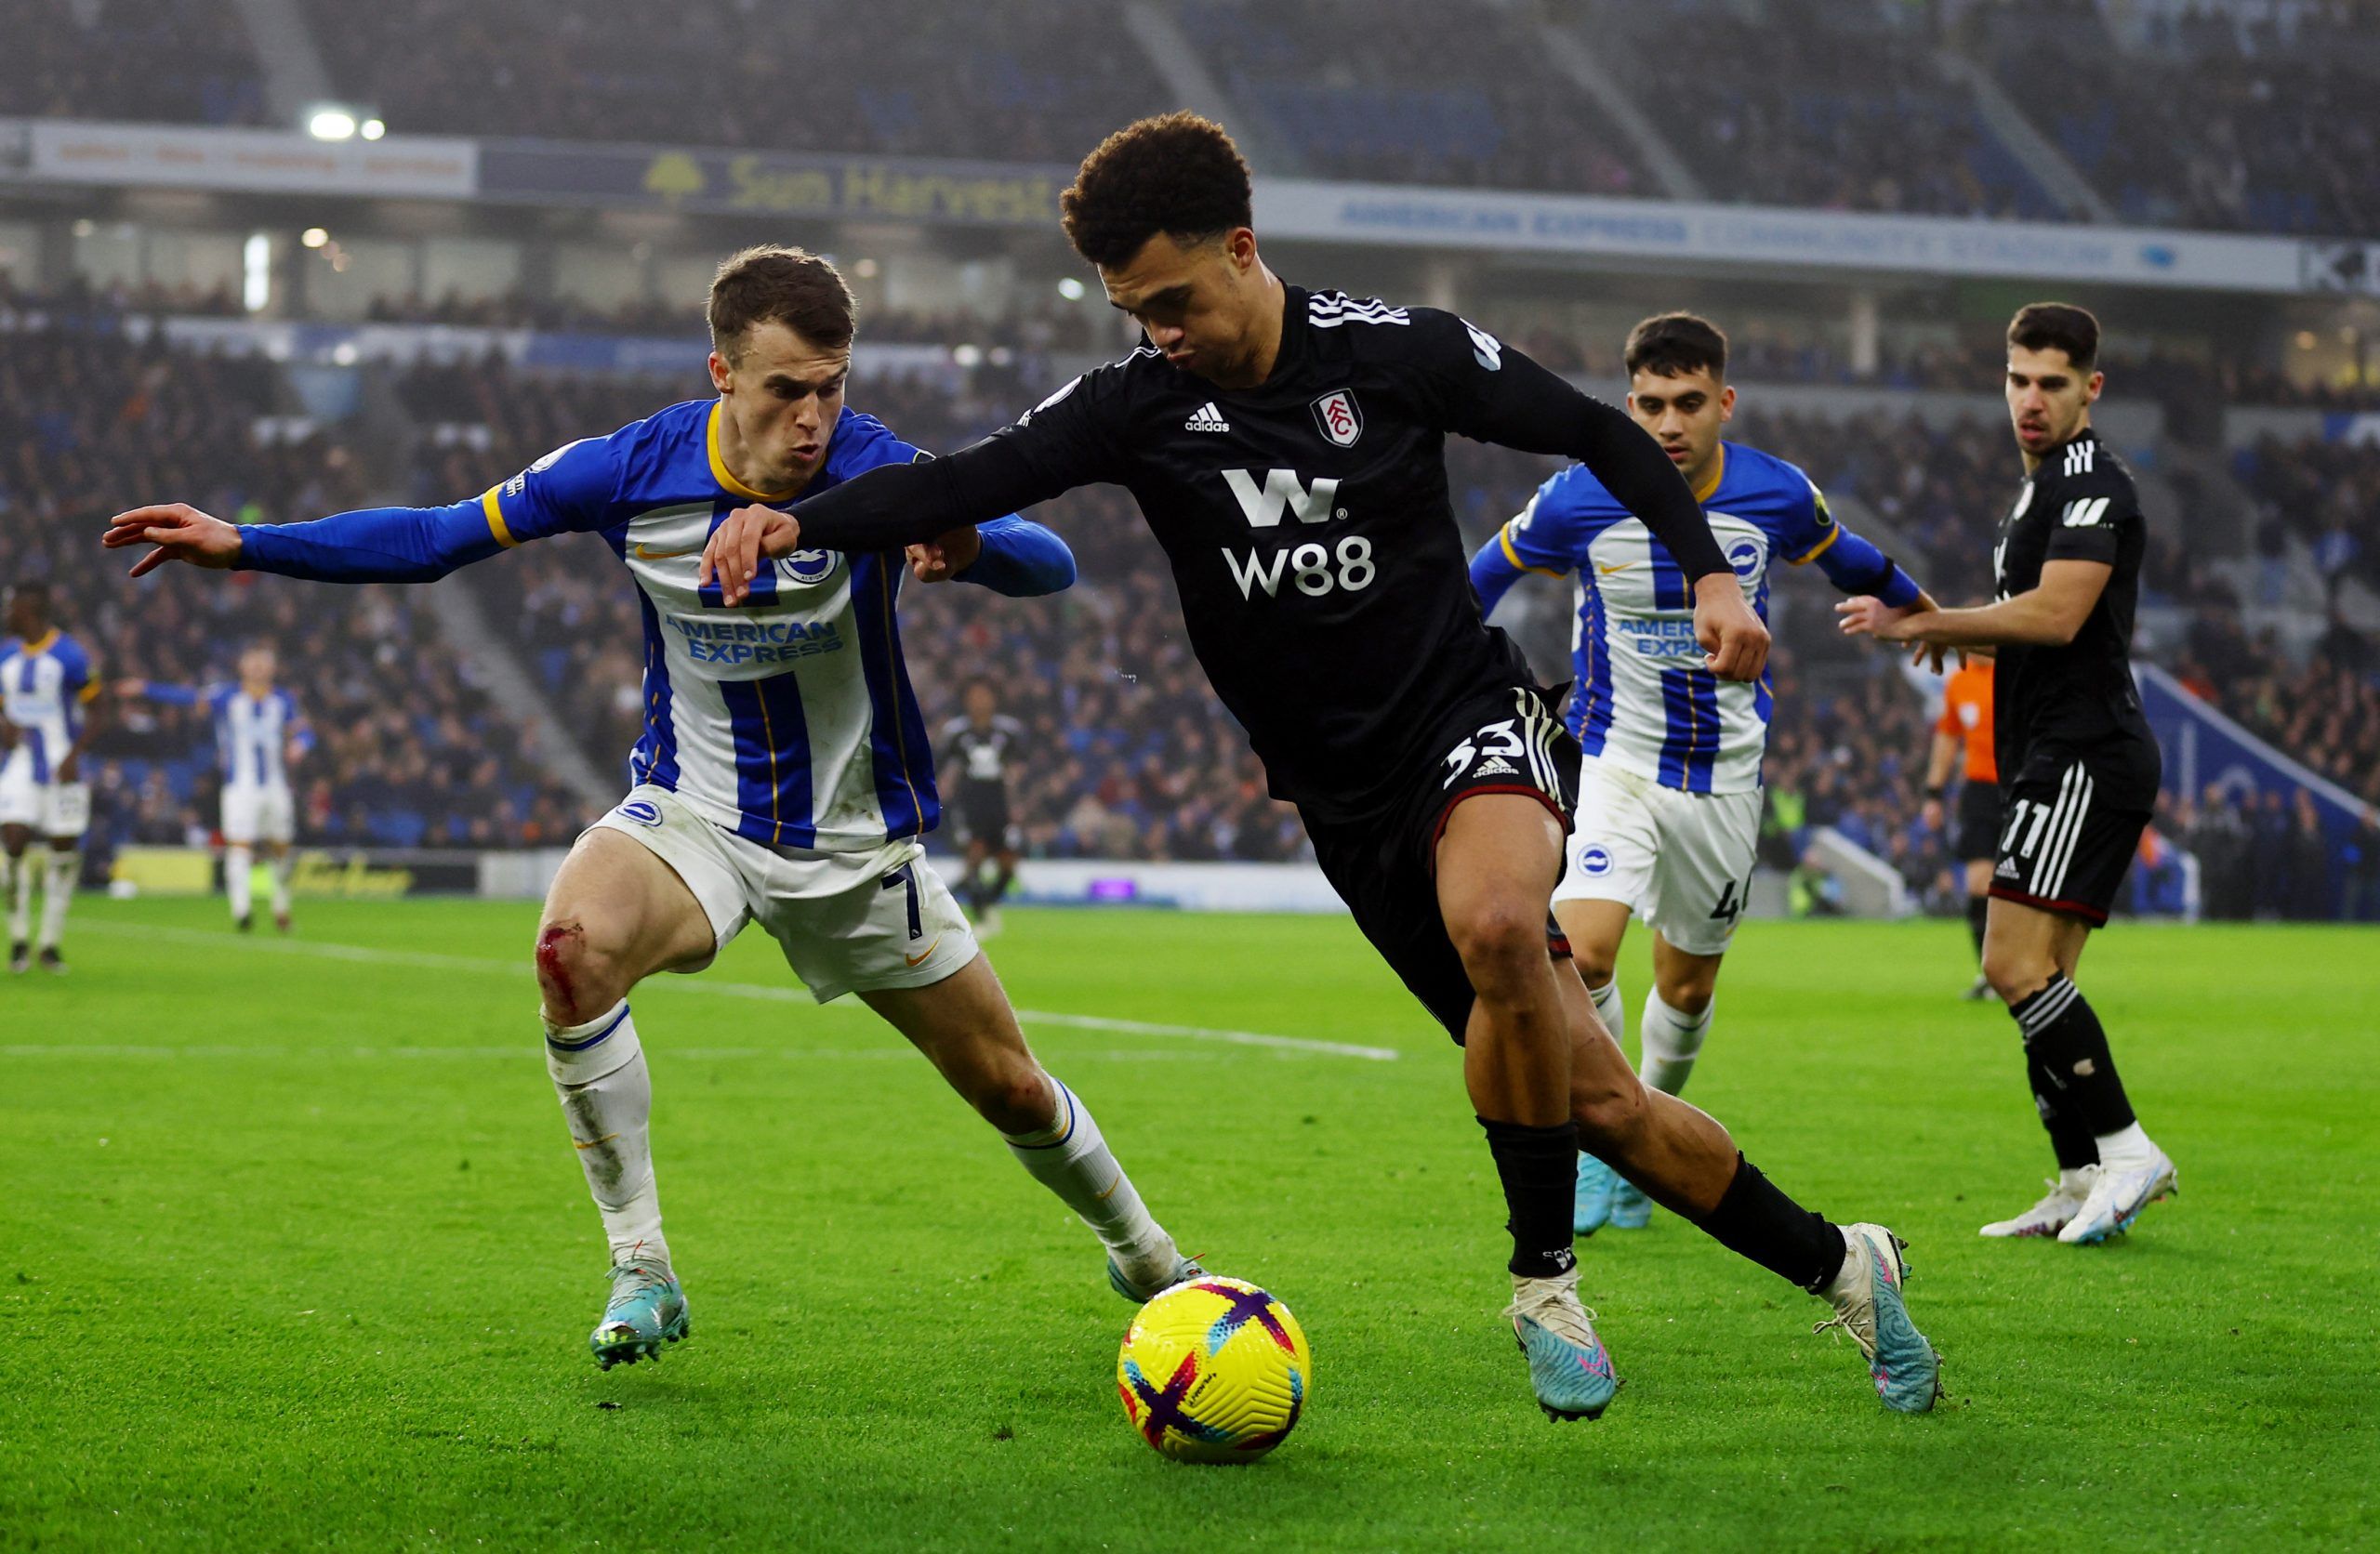 Soccer Football - Premier League - Brighton &amp; Hove Albion v Fulham - The American Express Community Stadium, Brighton, Britain - February 18, 2023 Fulham's Antonee Robinson in action with Brighton &amp; Hove Albion's Solly March Action Images via Reuters/Matthew Childs EDITORIAL USE ONLY. No use with unauthorized audio, video, data, fixture lists, club/league logos or 'live' services. Online in-match use limited to 75 images, no video emulation. No use in betting, games or single club /leagu